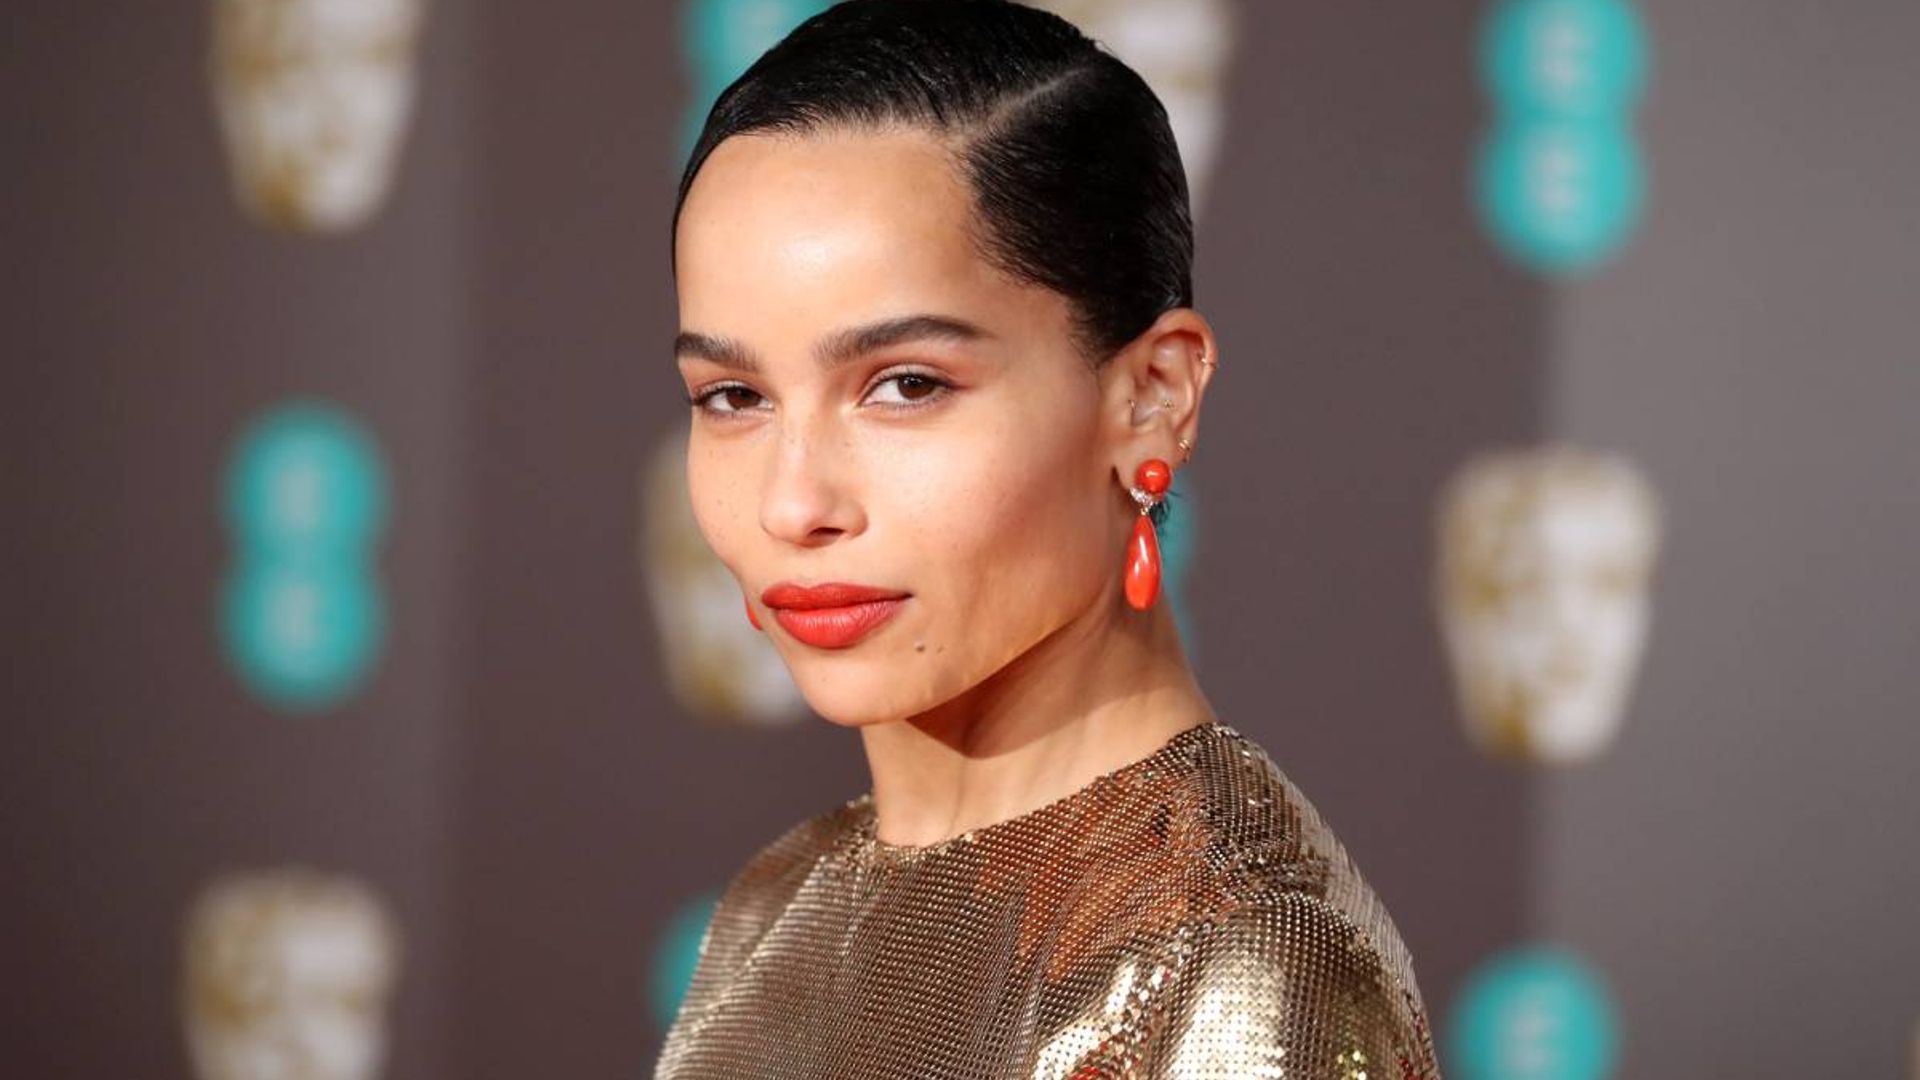 Zoe Kravitz gives a glimpse of her gorgeous living room in stunning selfie